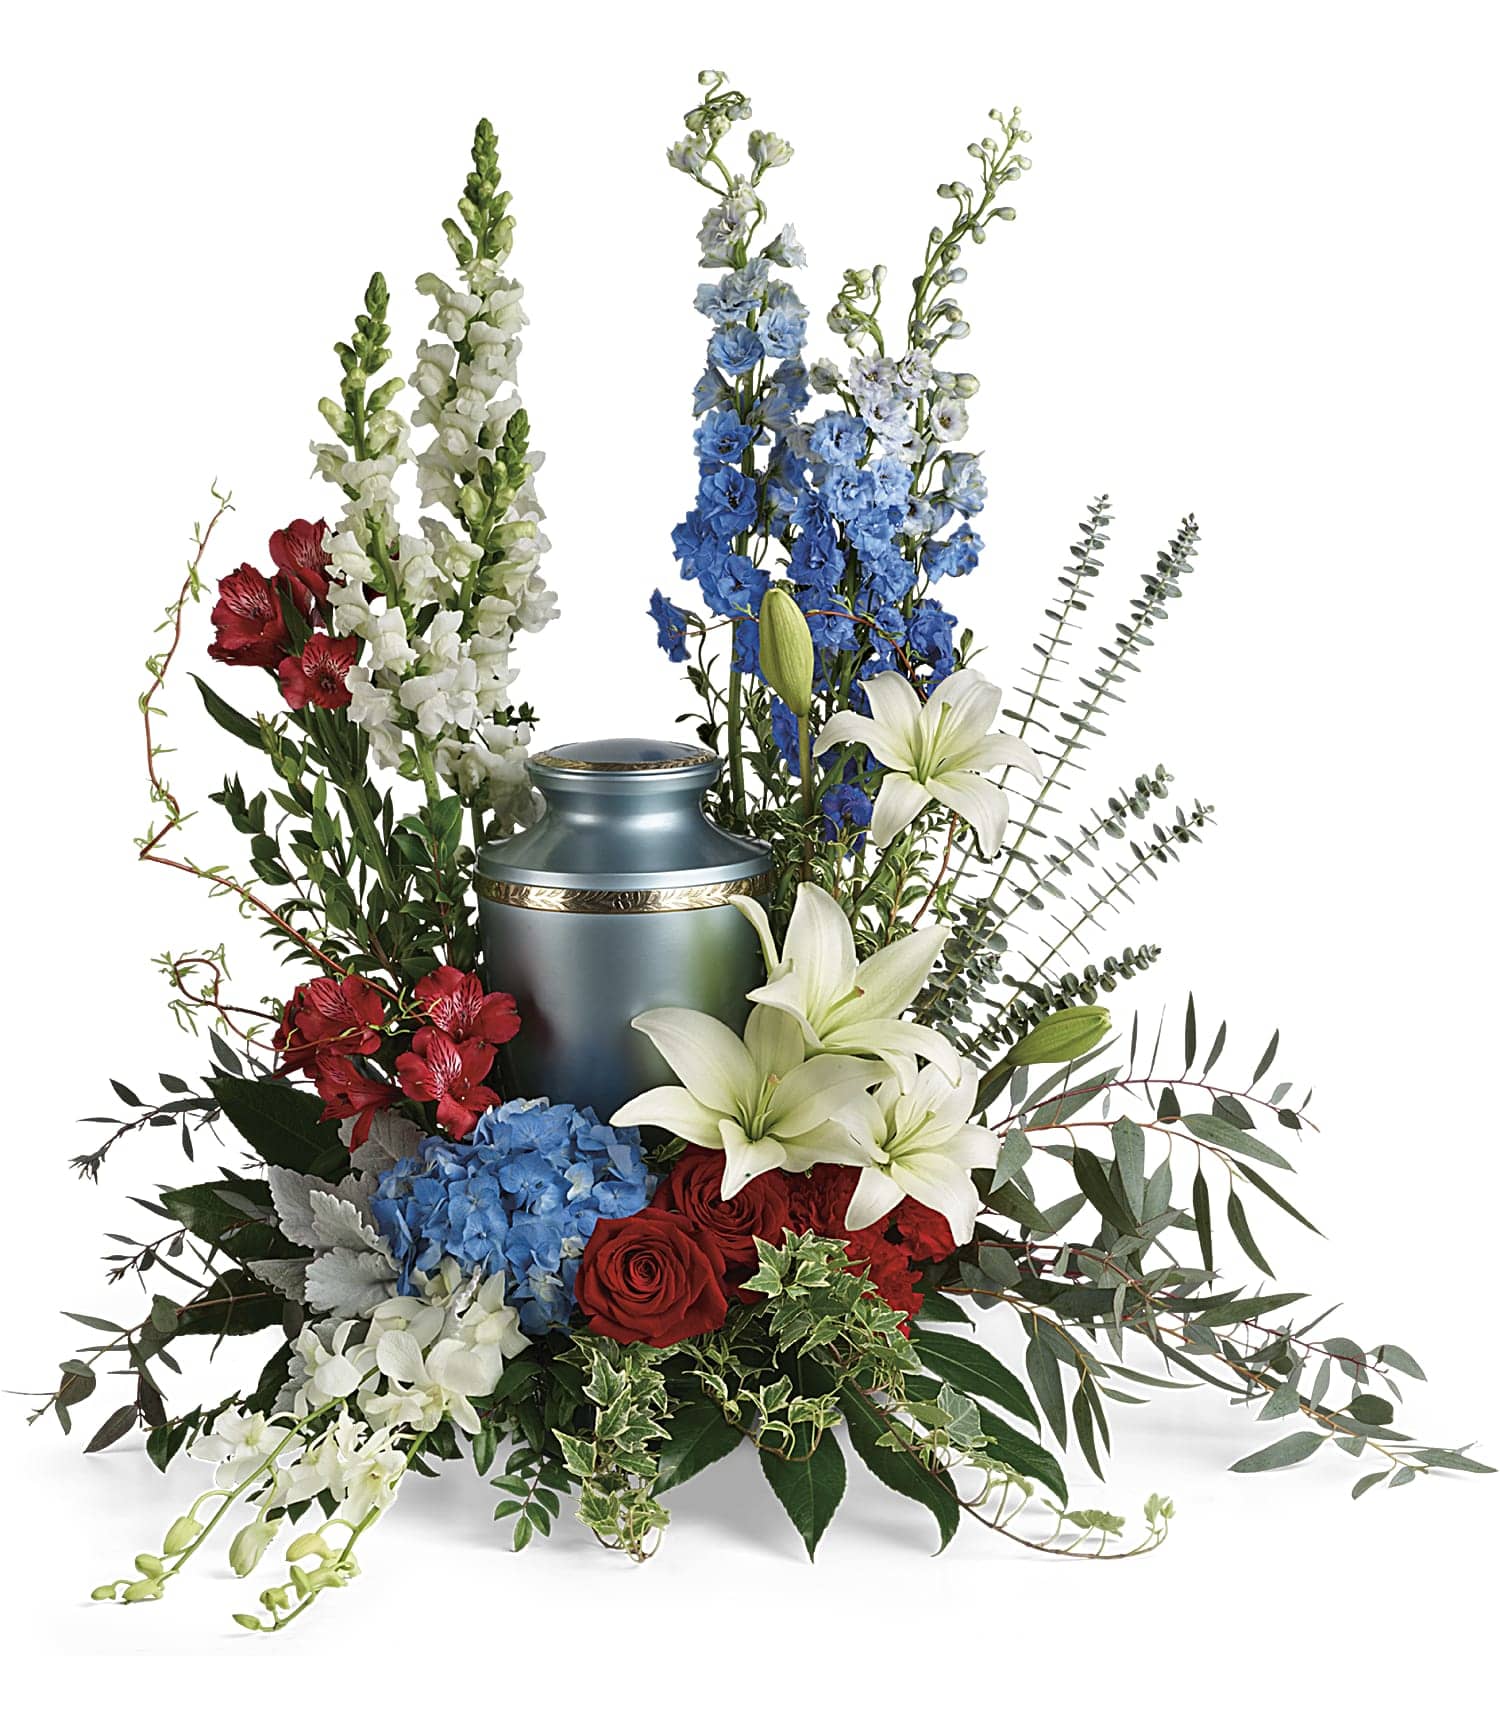 Reflections Of Honor Cremation Tribute - Proud and patriotic, this boldly designed red, white and blue bouquet displays the cremation urn with honor. This patriotic tribute includes blue hydrangea, white dendrobium orchids, red roses, white asiatic lilies, red alstroemeria, red carnations, blue delphinium, white snapdragons, dusty miller, myrtle, huckleberry, variegated ivy, curly willow, aralia leaves, parvifolia eucalyptus, spiral eucalyptus, and lemon leaf. Arrangement does not include urn.  T281-8A